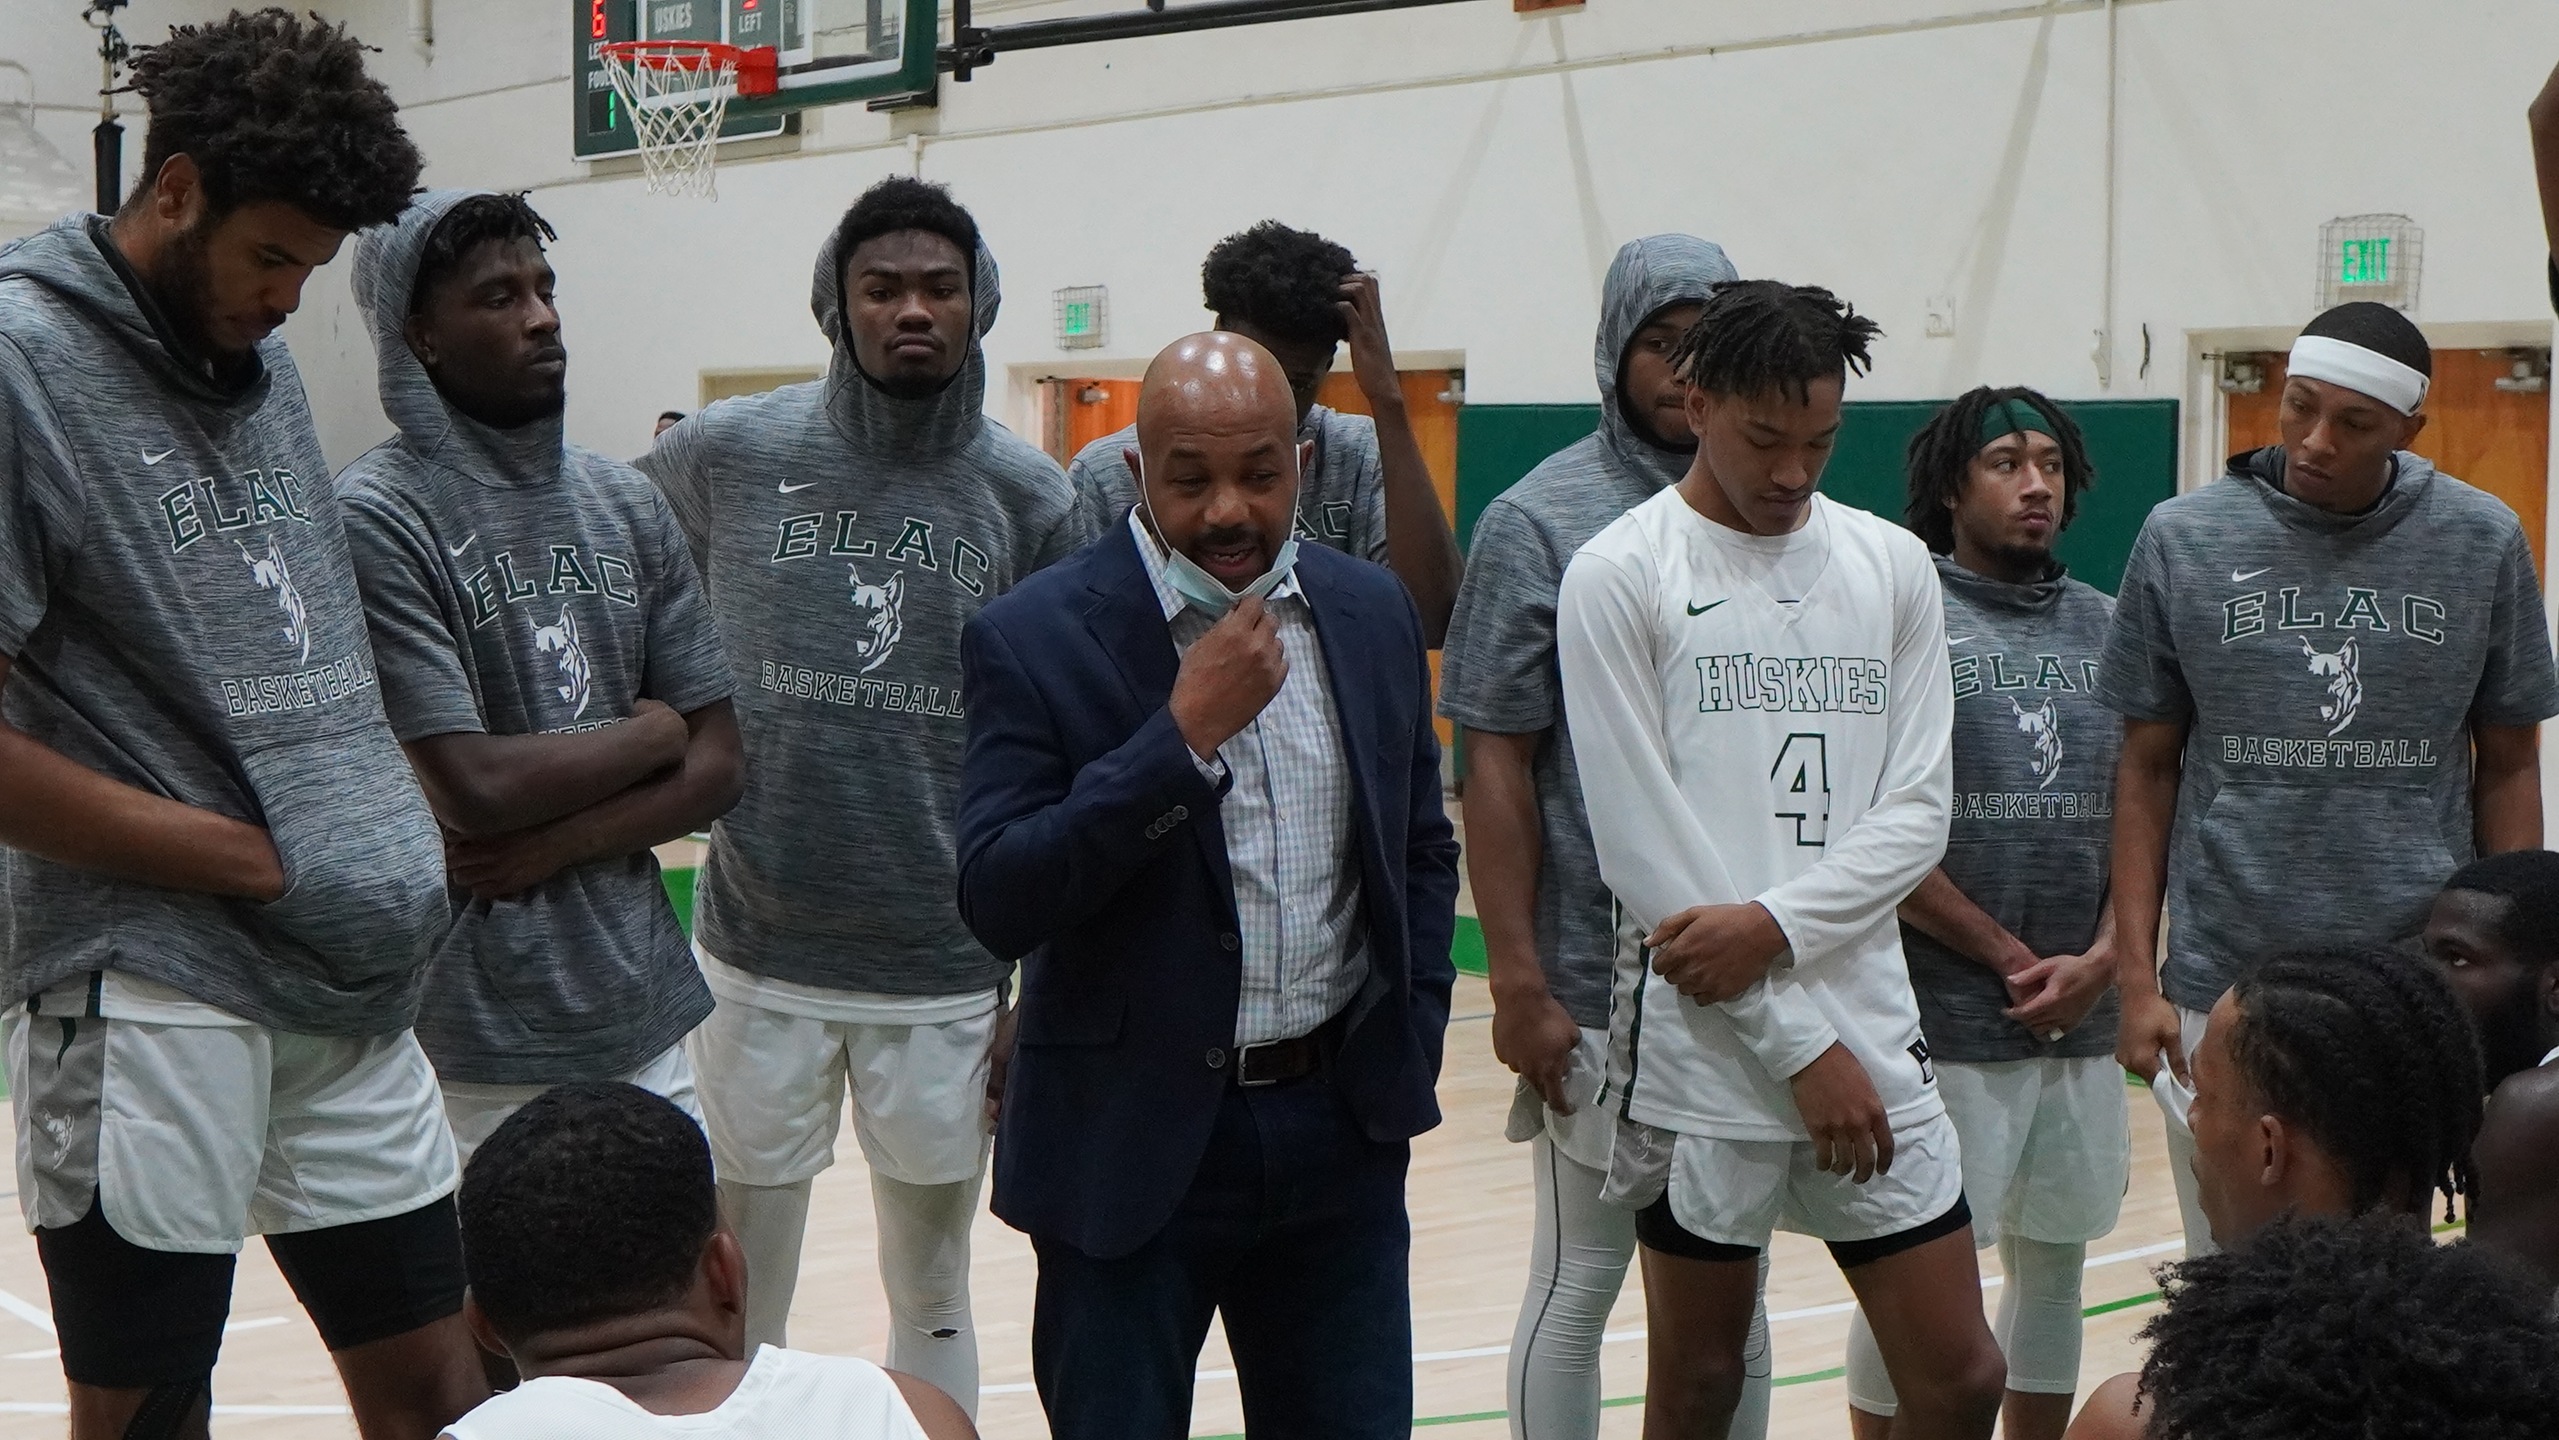 Last Chance U Basketball Players Now - Where Is ELAC Team Now?